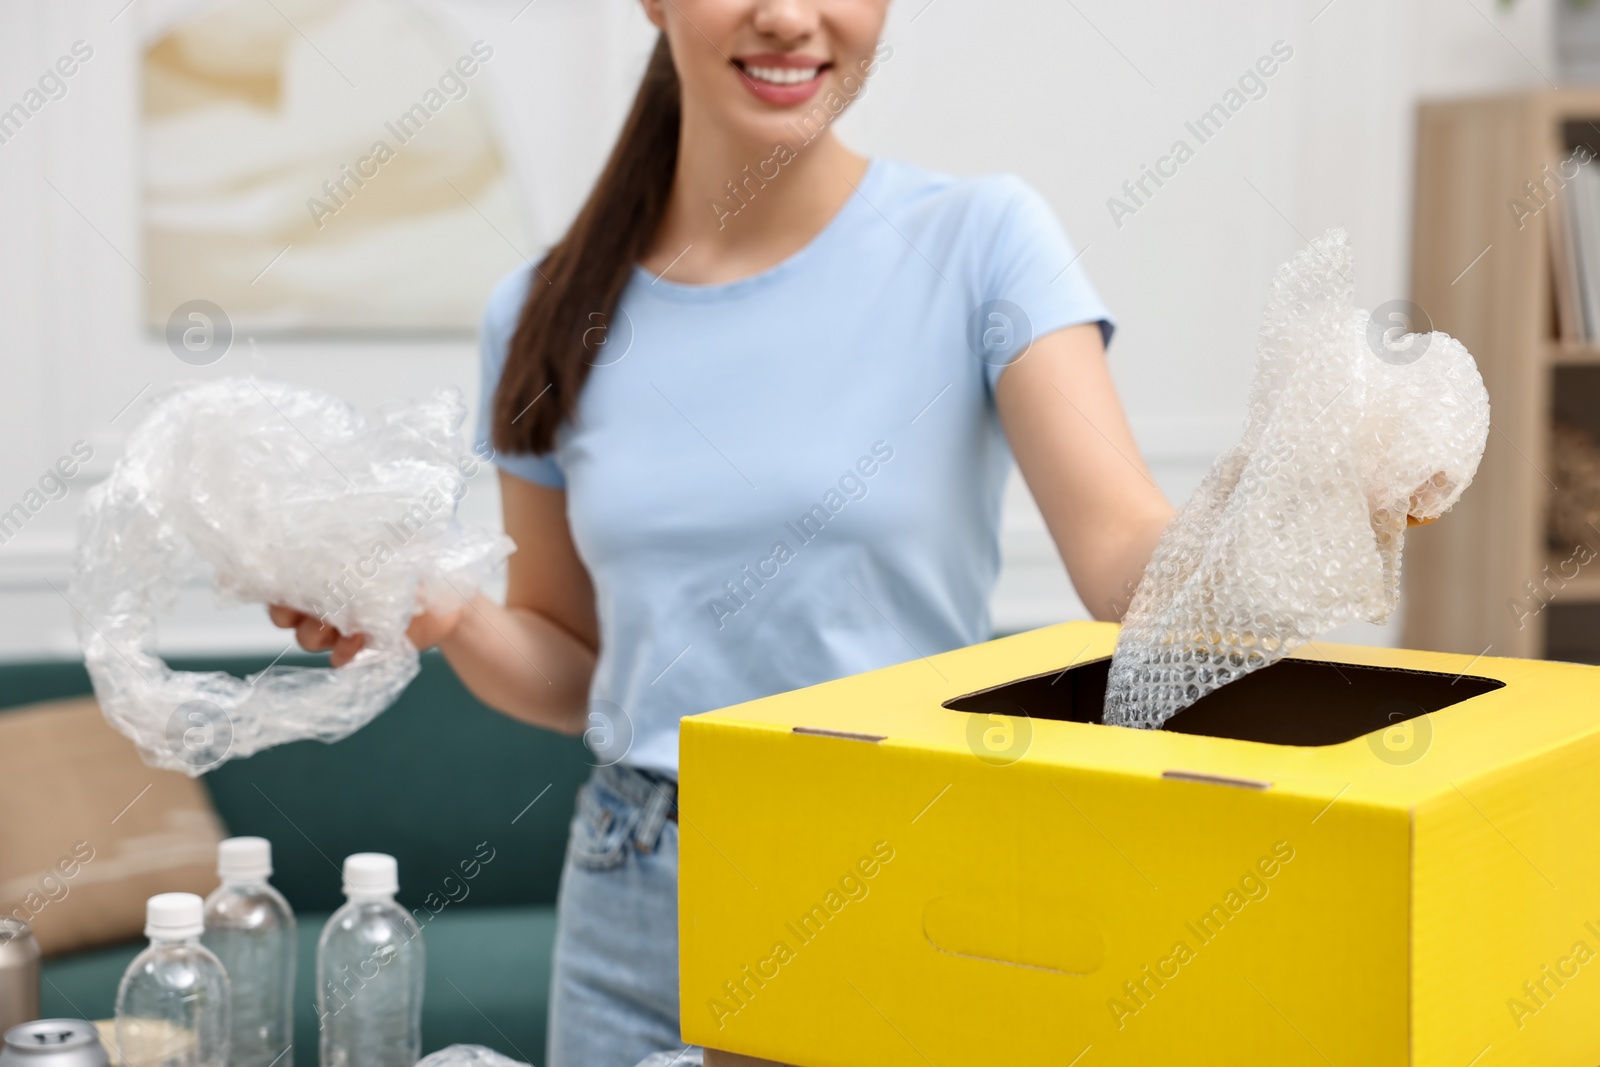 Photo of Garbage sorting. Smiling woman throwing plastic package into cardboard box in room, closeup